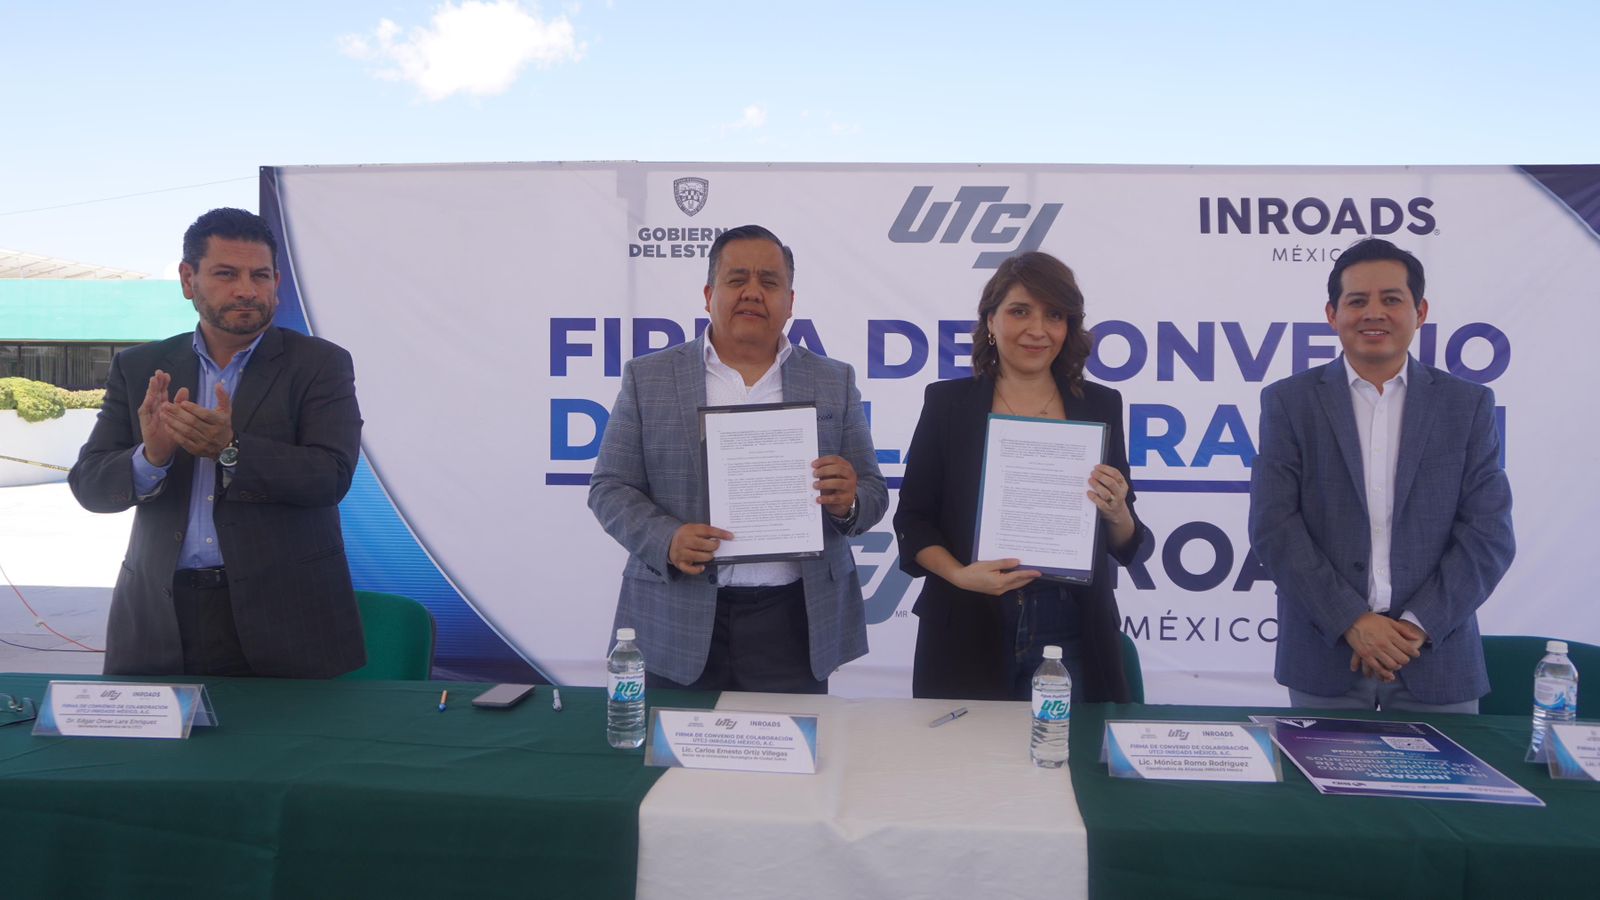 INROADS Mexico offers scholarships in Juarez